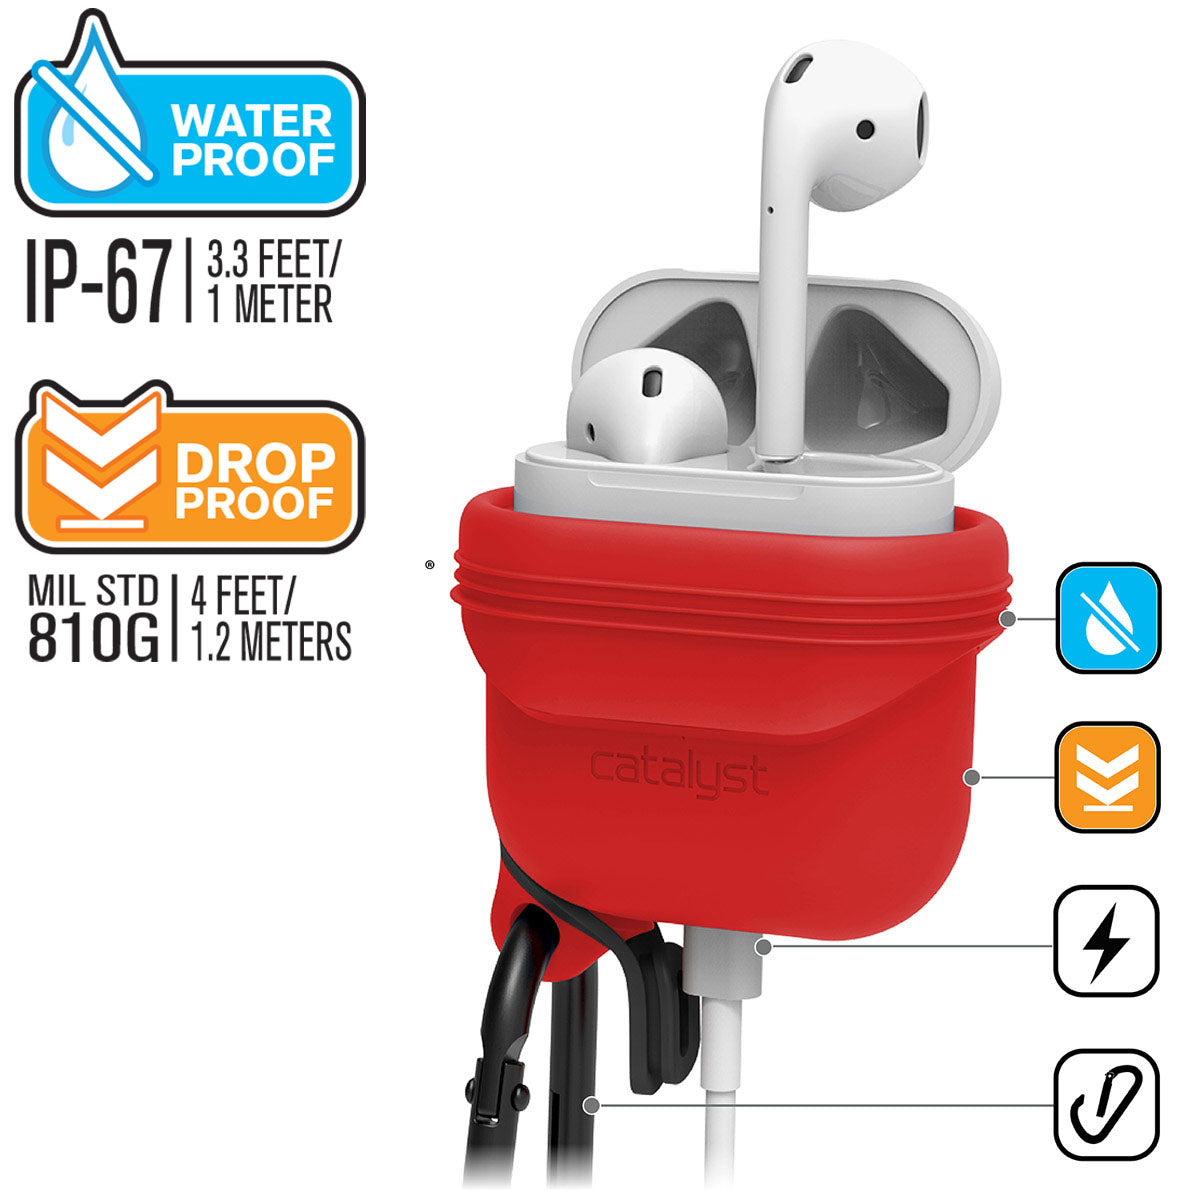 Catalyst airpods gen2/1 waterproof case + carabiner showing the case drop proof and water proof features in flame red text reads water proof IP-67 3.3 FEET/1 METER DROP PROOF MIL STD 810G 1.2 METERS